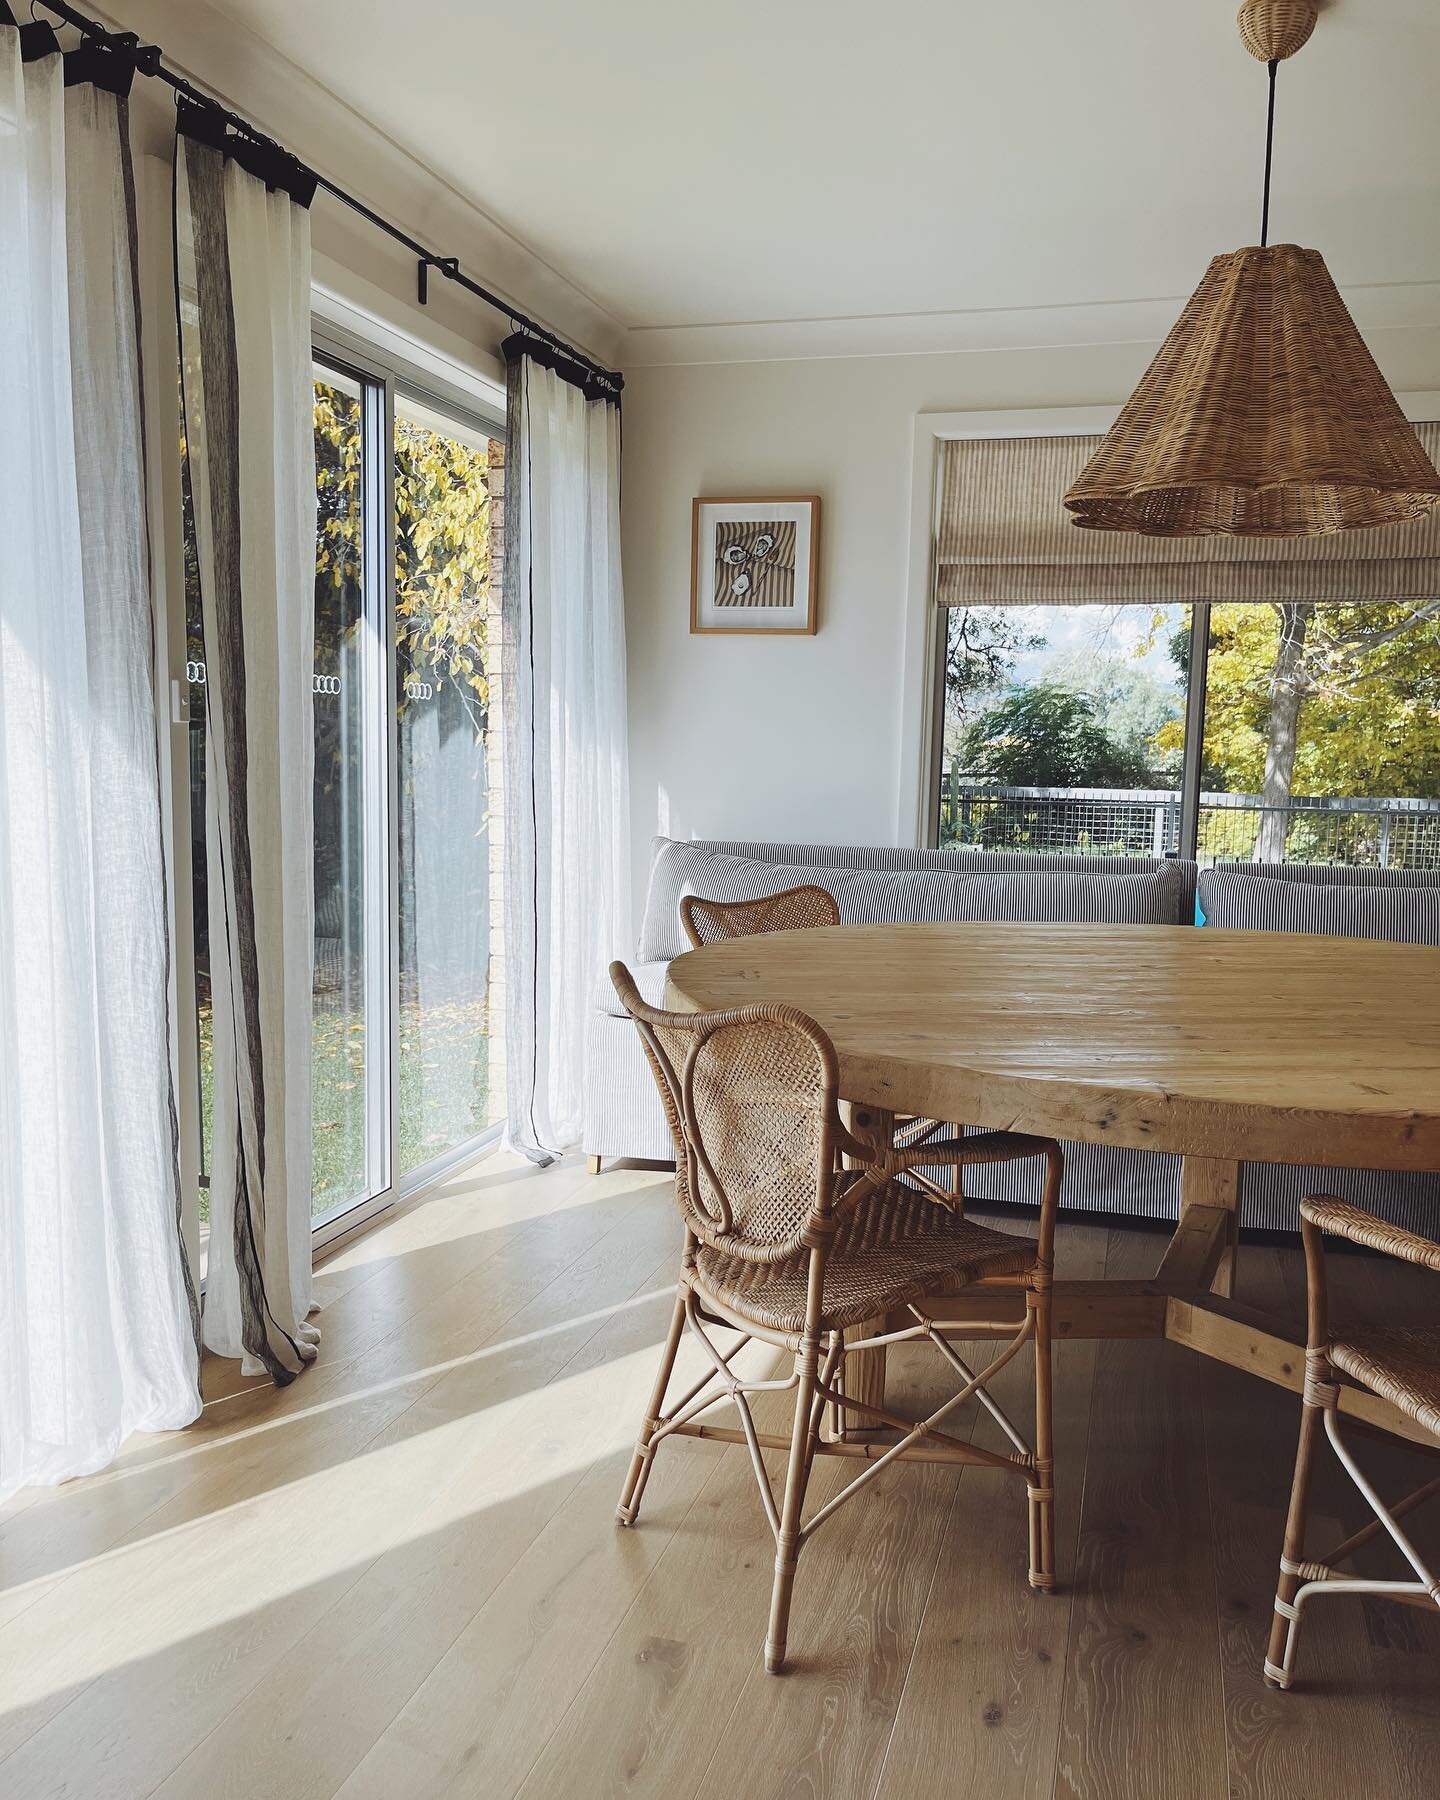 Unwind and reconnect at The Sun Casa 〰️

#thesuncasa #airbnb #visitmudgeensw #boutiqueaccommodation